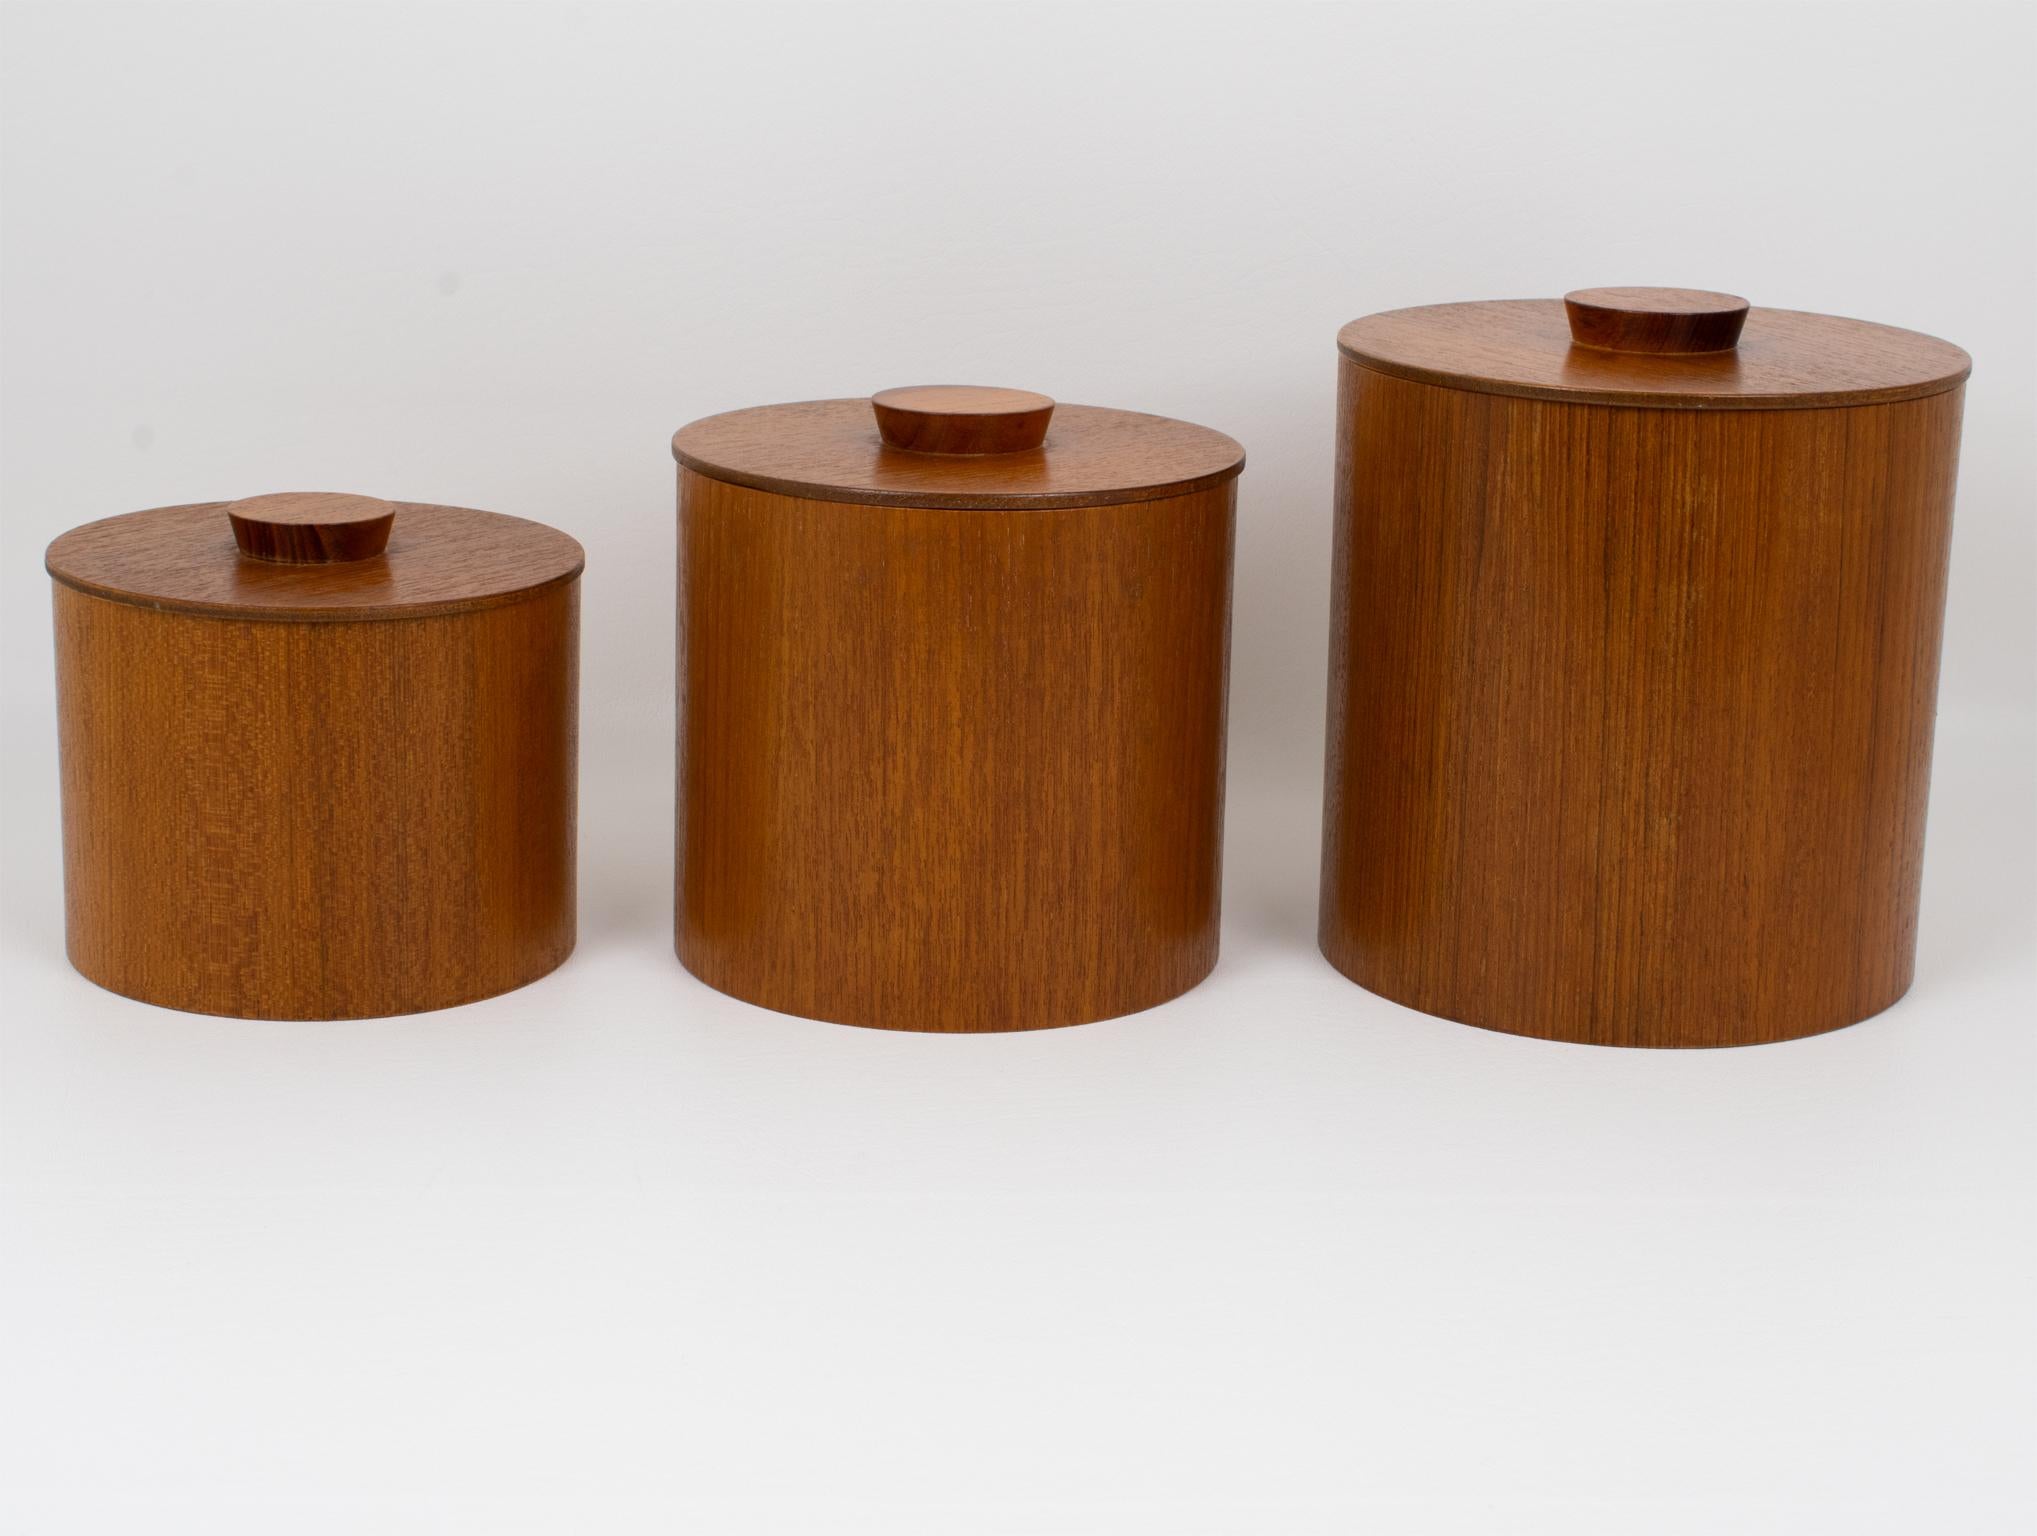 These elegant Mid-Century-Modern kitchen jars or boxes were crafted in Japan in the 1960s. The set of three pieces features Japanese modernist teak wood kitchen canisters. This sleek teak box set is perfect for any kitchen. Each box is crafted from